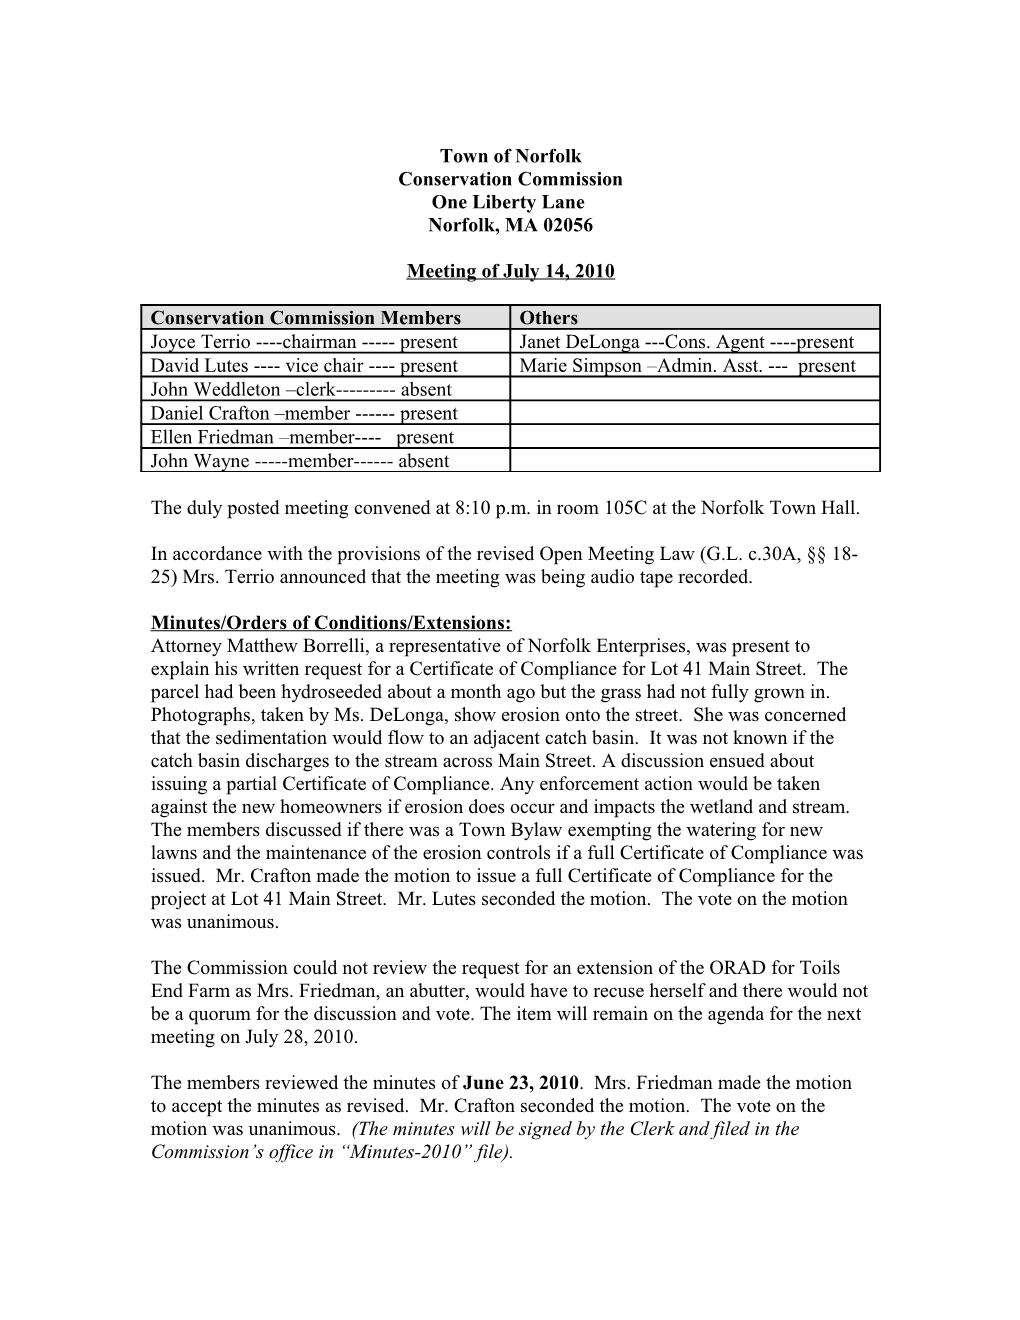 Conservation Commission Minutes of July 14, 2010